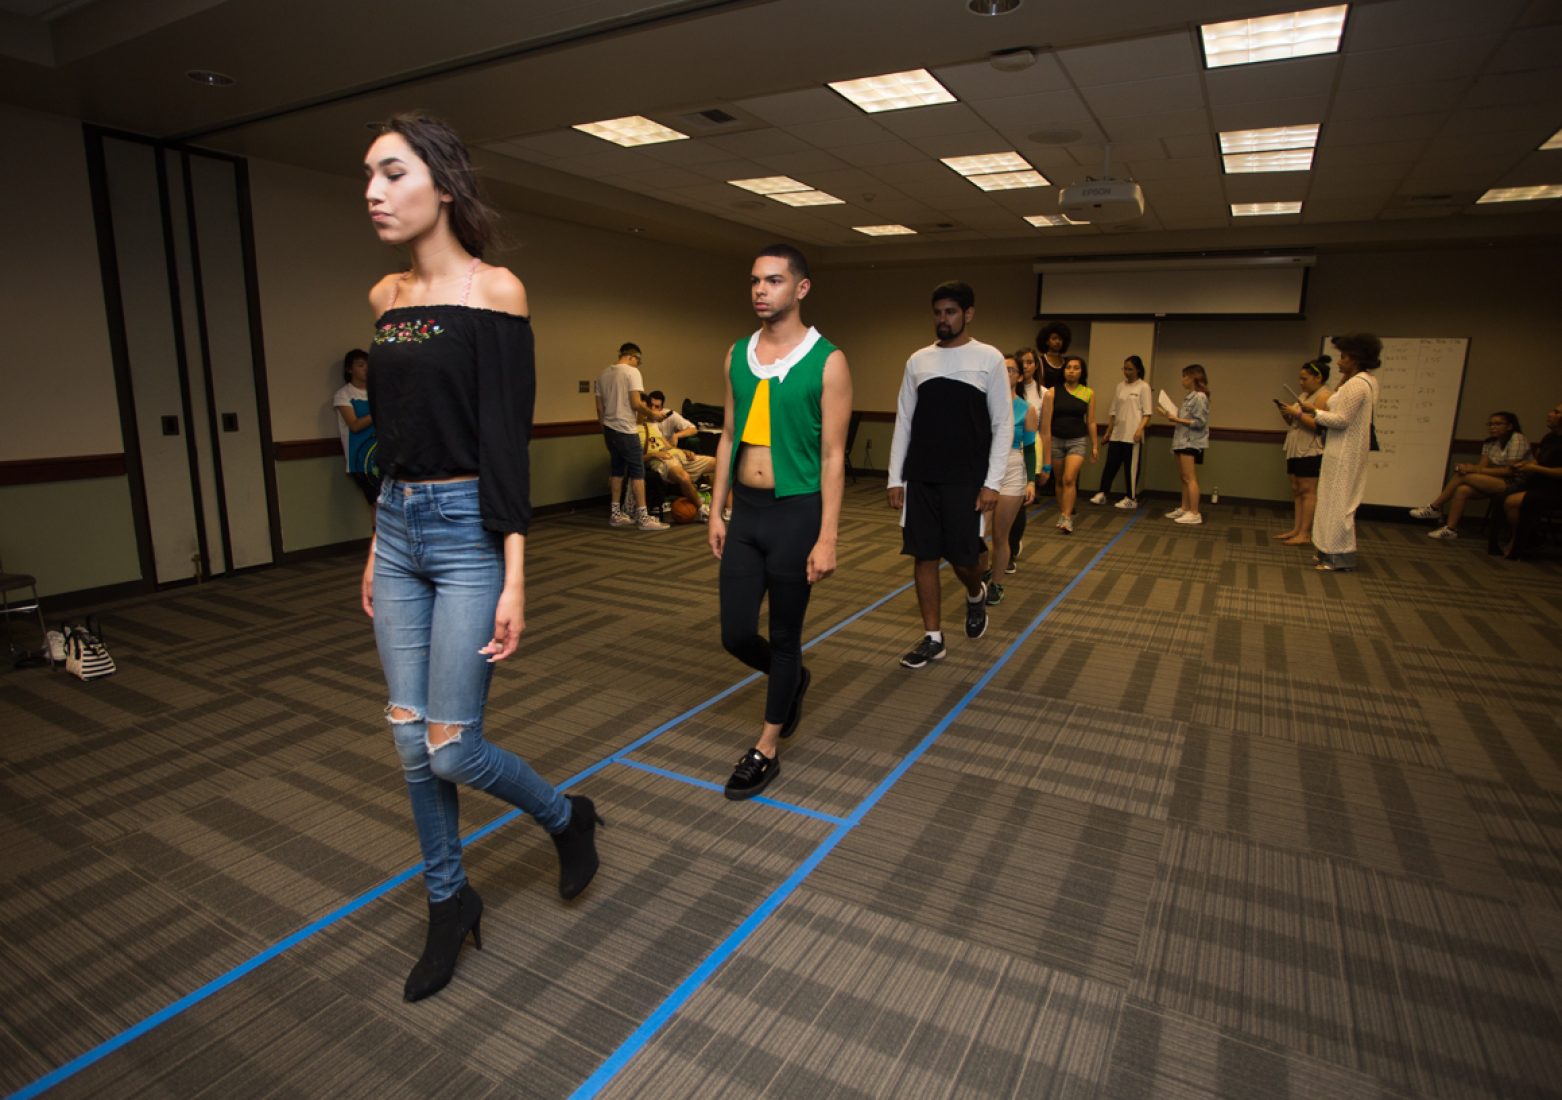 Models practice their runway walks during rehearsal in the University Union Foothill Suite on Wednesday. (Photo by Nicole Fowler)